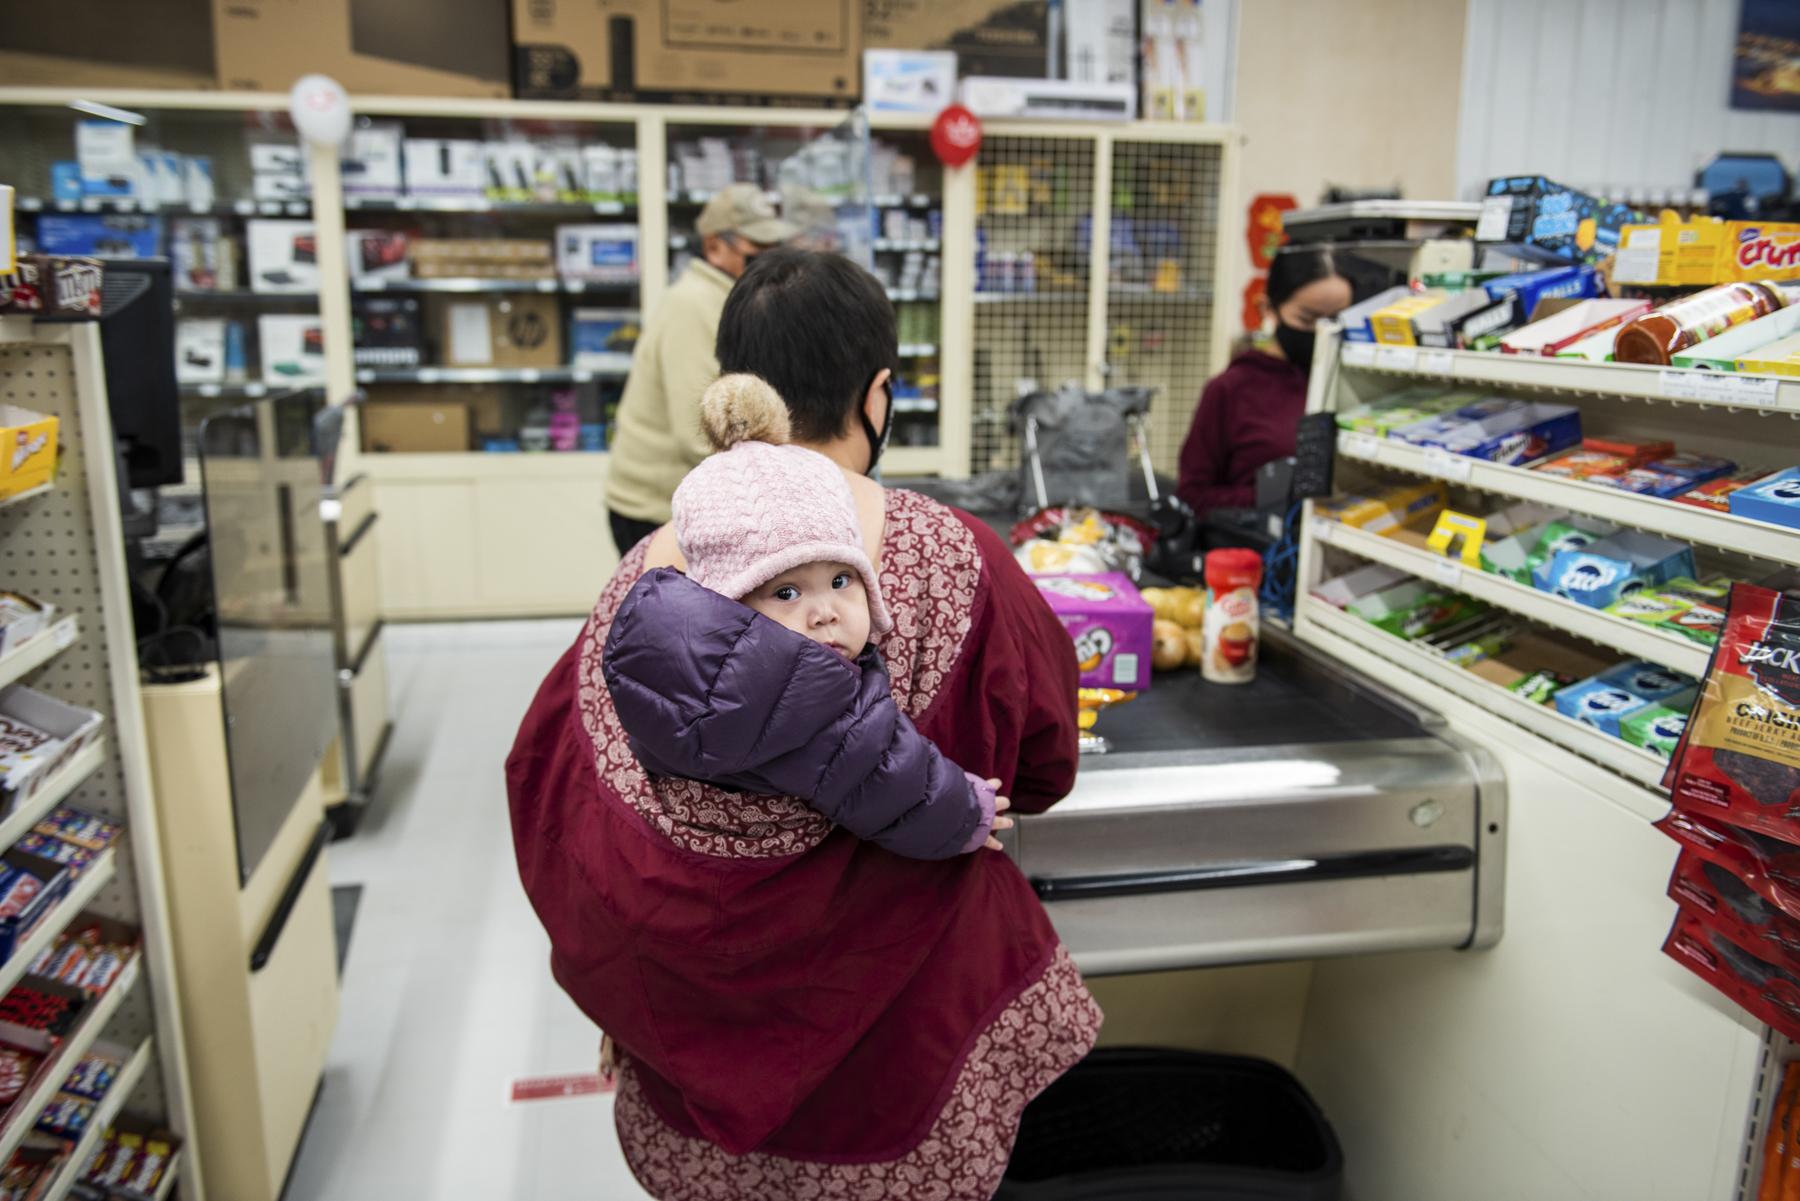 The Hunt for Healthy Food - Pangnirtung residents buy groceries and supplies at the...